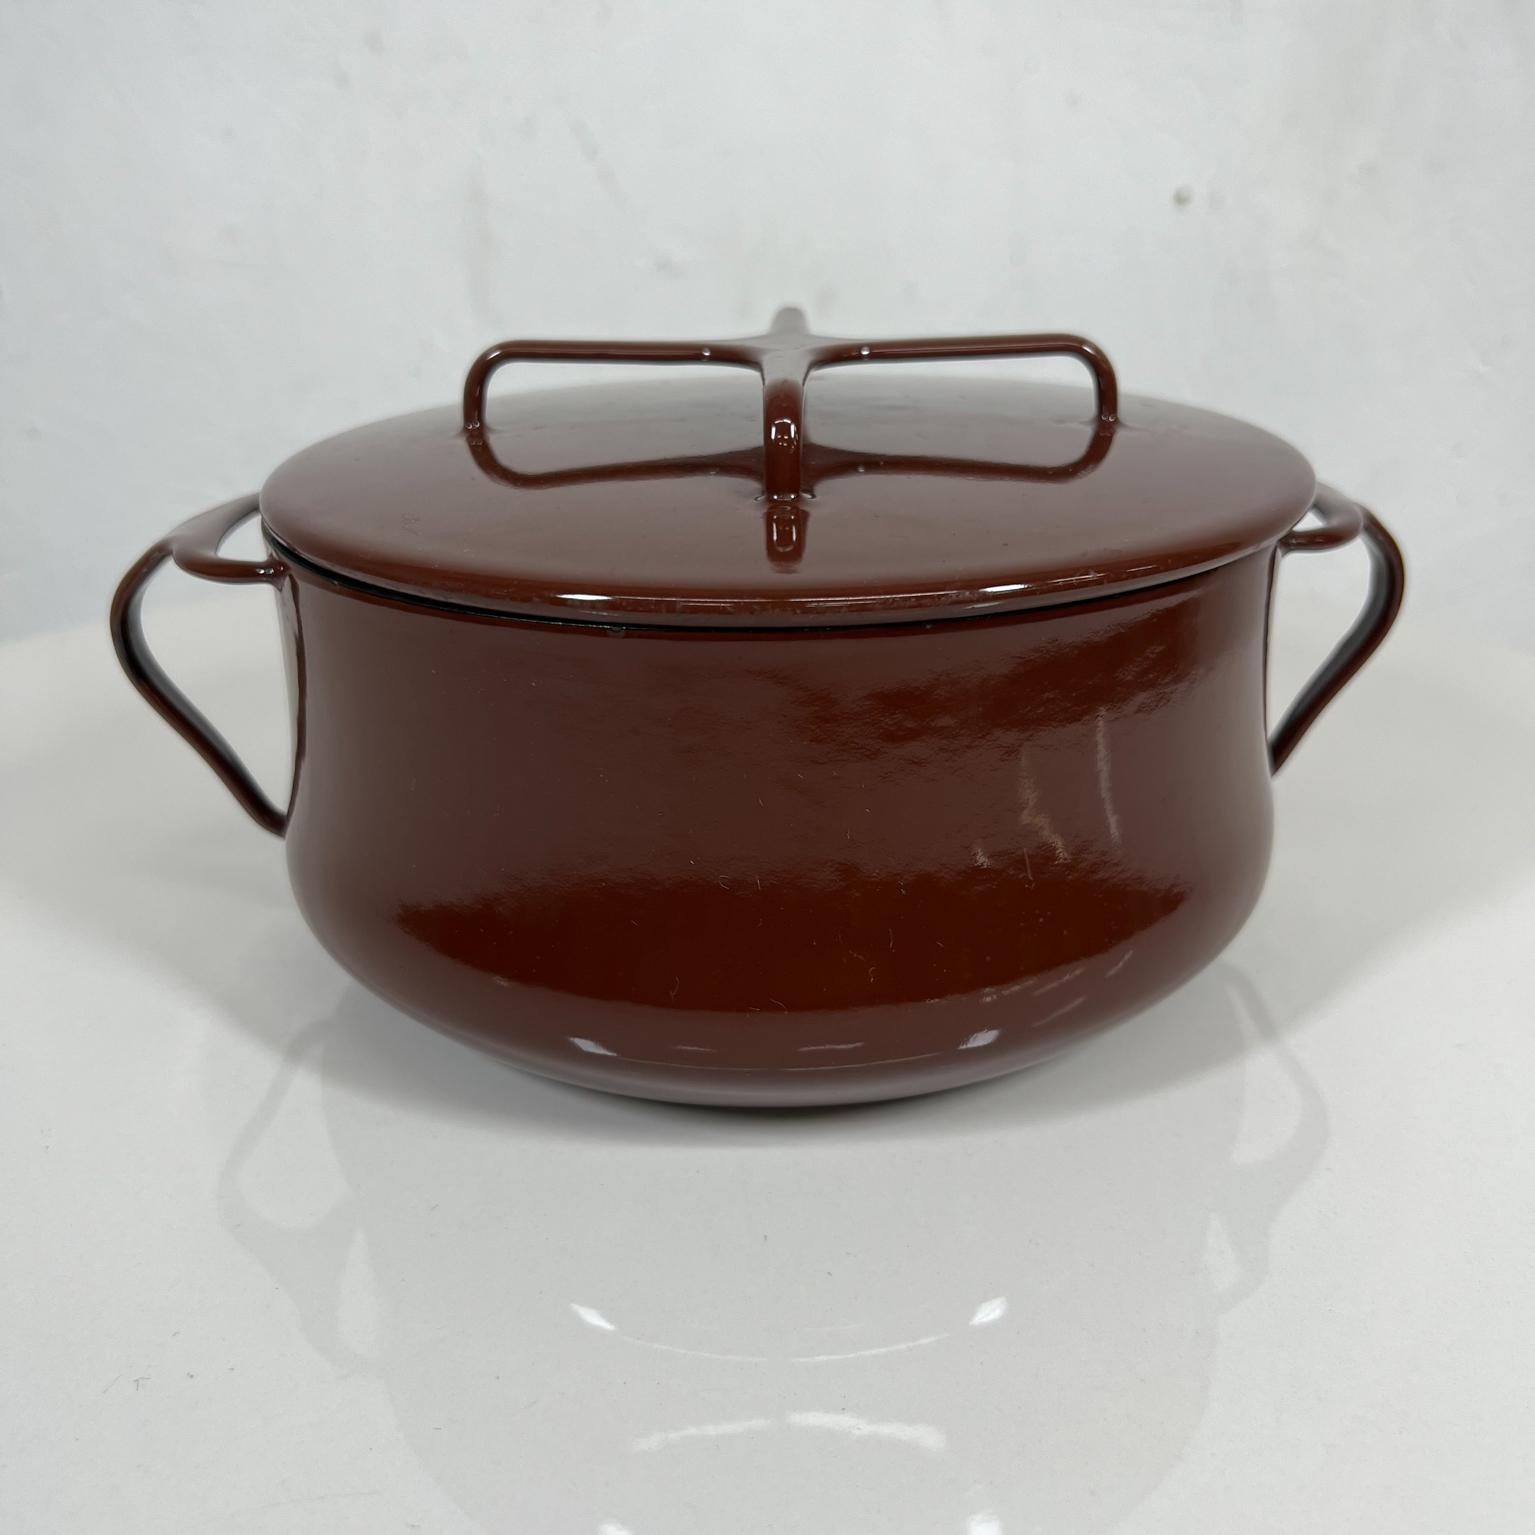 DANSK brown enamelware small casserole covered pot trivet top IHQ France 1956
Designed by Jens Herald Quistgaard made in France.
Kobenstyle Line introduced in 1956.
Maker stamp present.
Measures: 4.75 tall x 10 wide x 7.25 diameter
Preowned